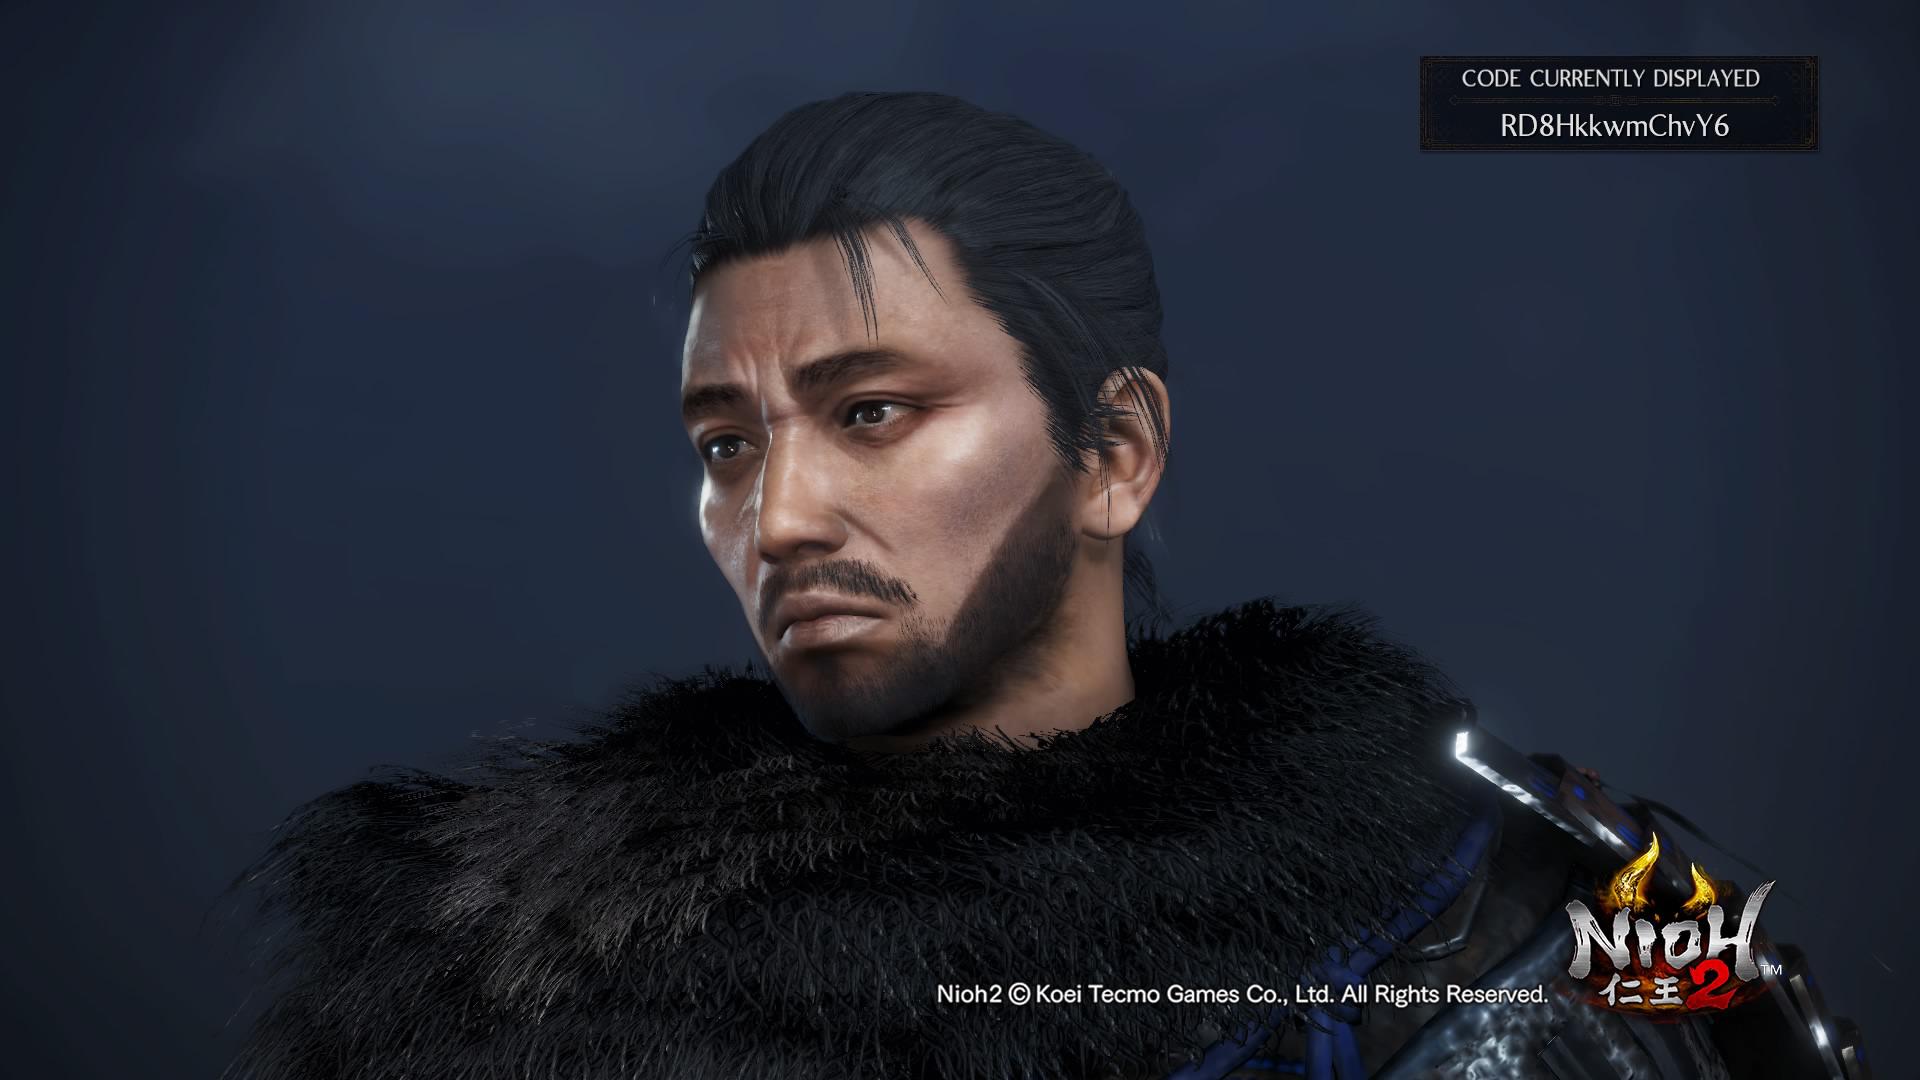 My attempt at Jin Sakai from the upcoming Ghost of Tsushima